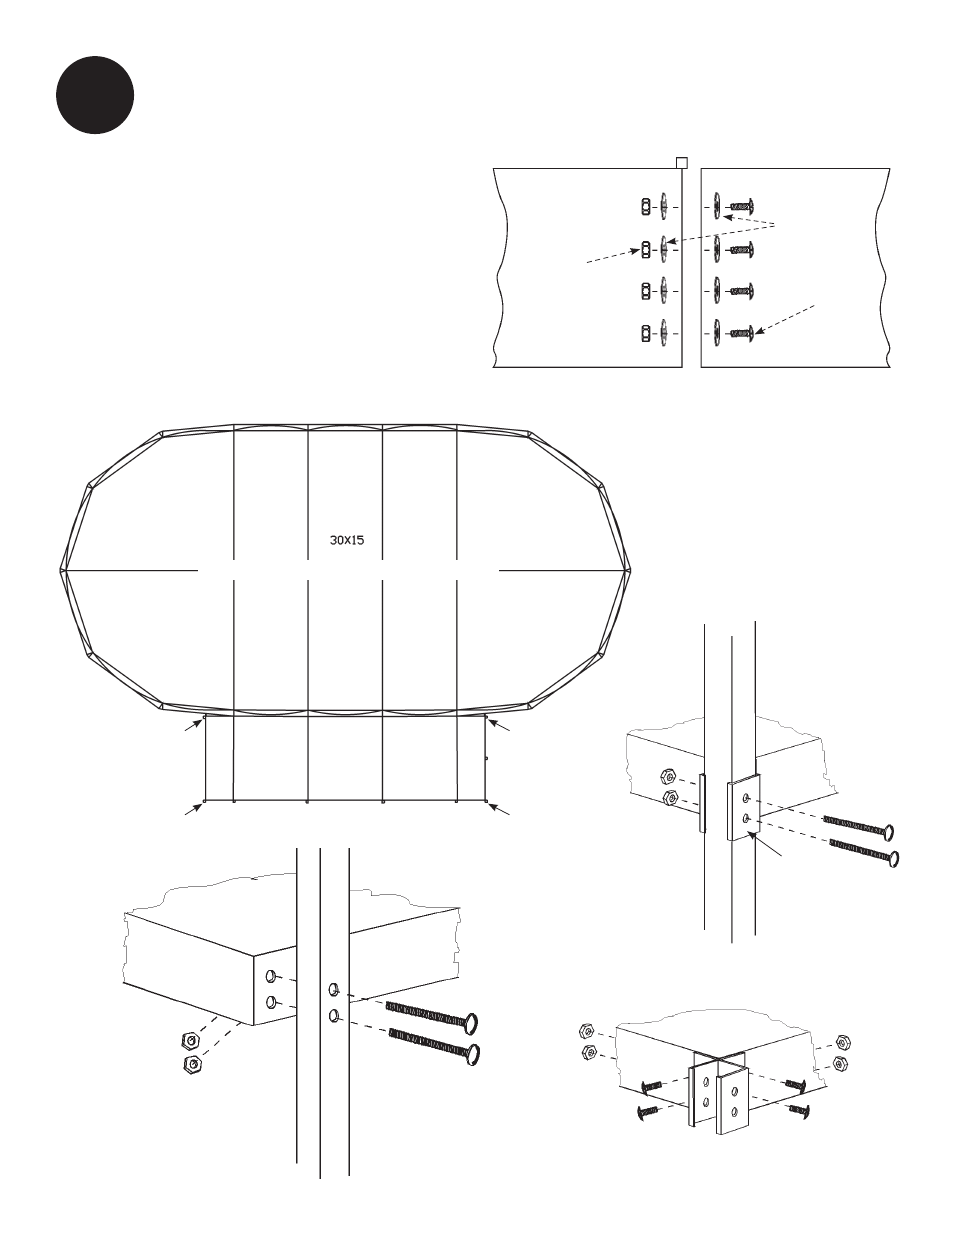 Position the 18”x 5’ left and right patios | Swim'n Play side deck User Manual | Page 7 / 16